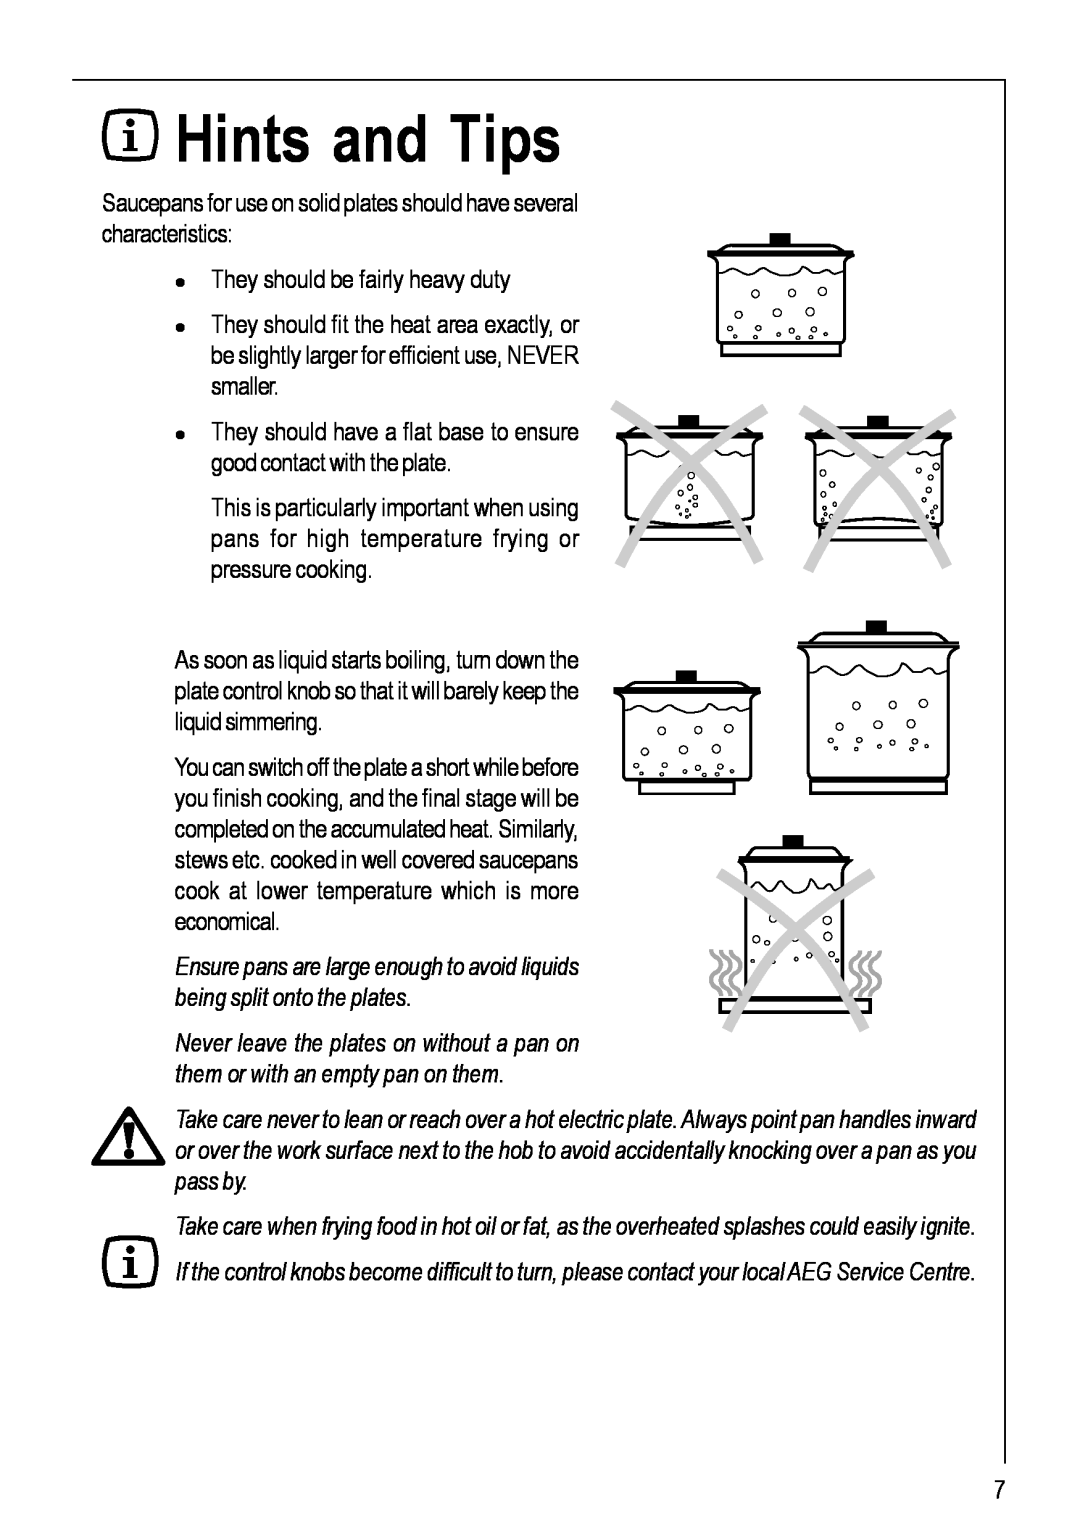 Electrolux 111 K Hints and Tips, Saucepans for use on solid plates should have several characteristics 